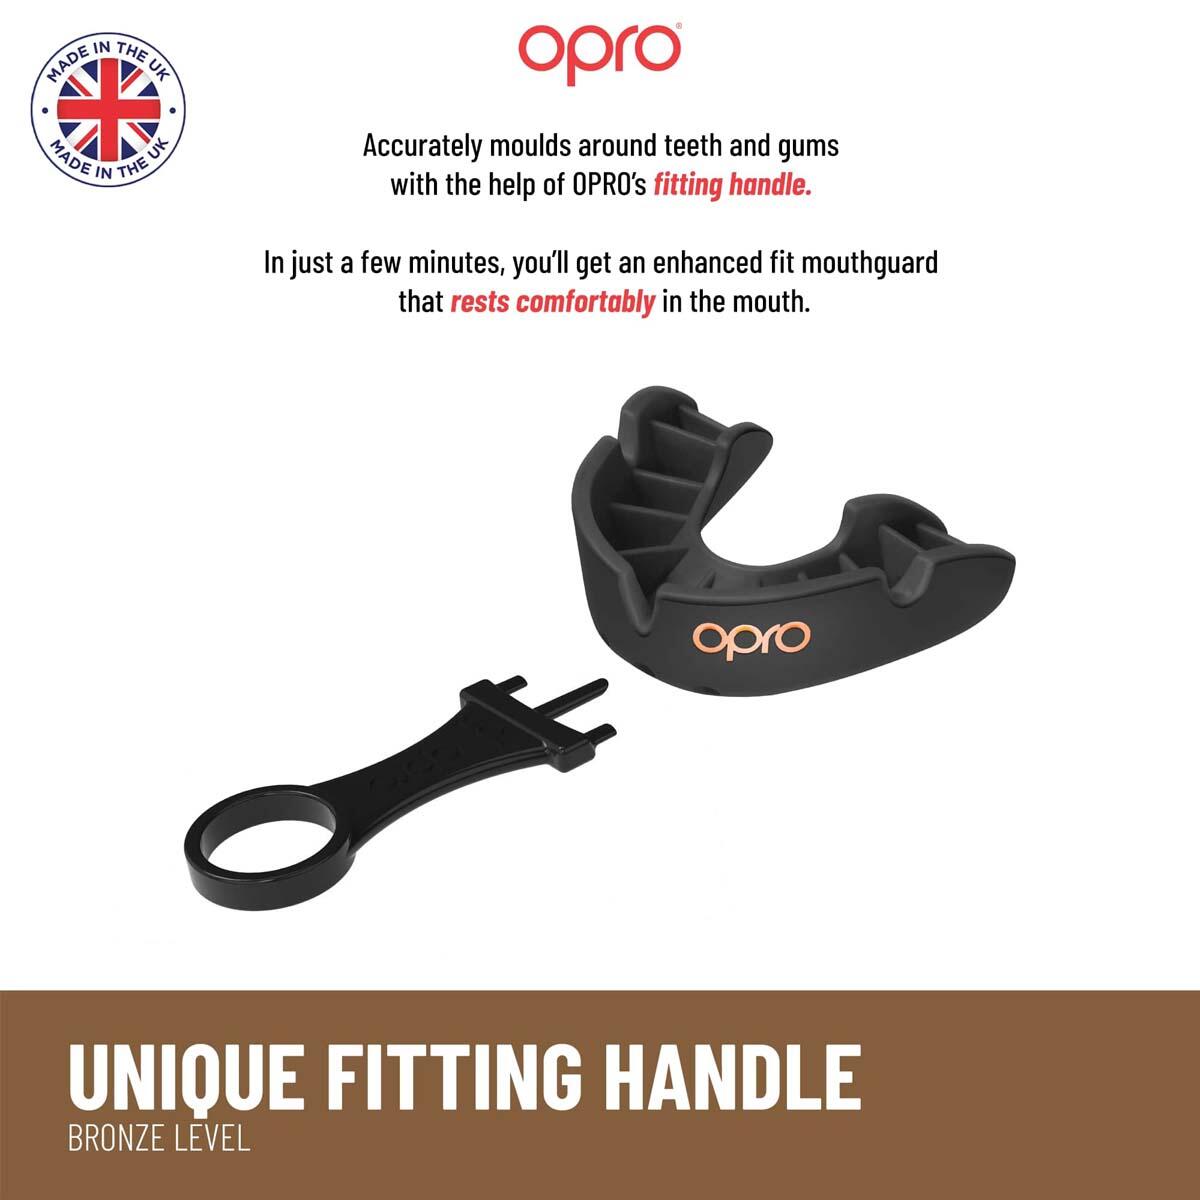 White Opro Junior Bronze Self-Fit Mouth Guard 4/5